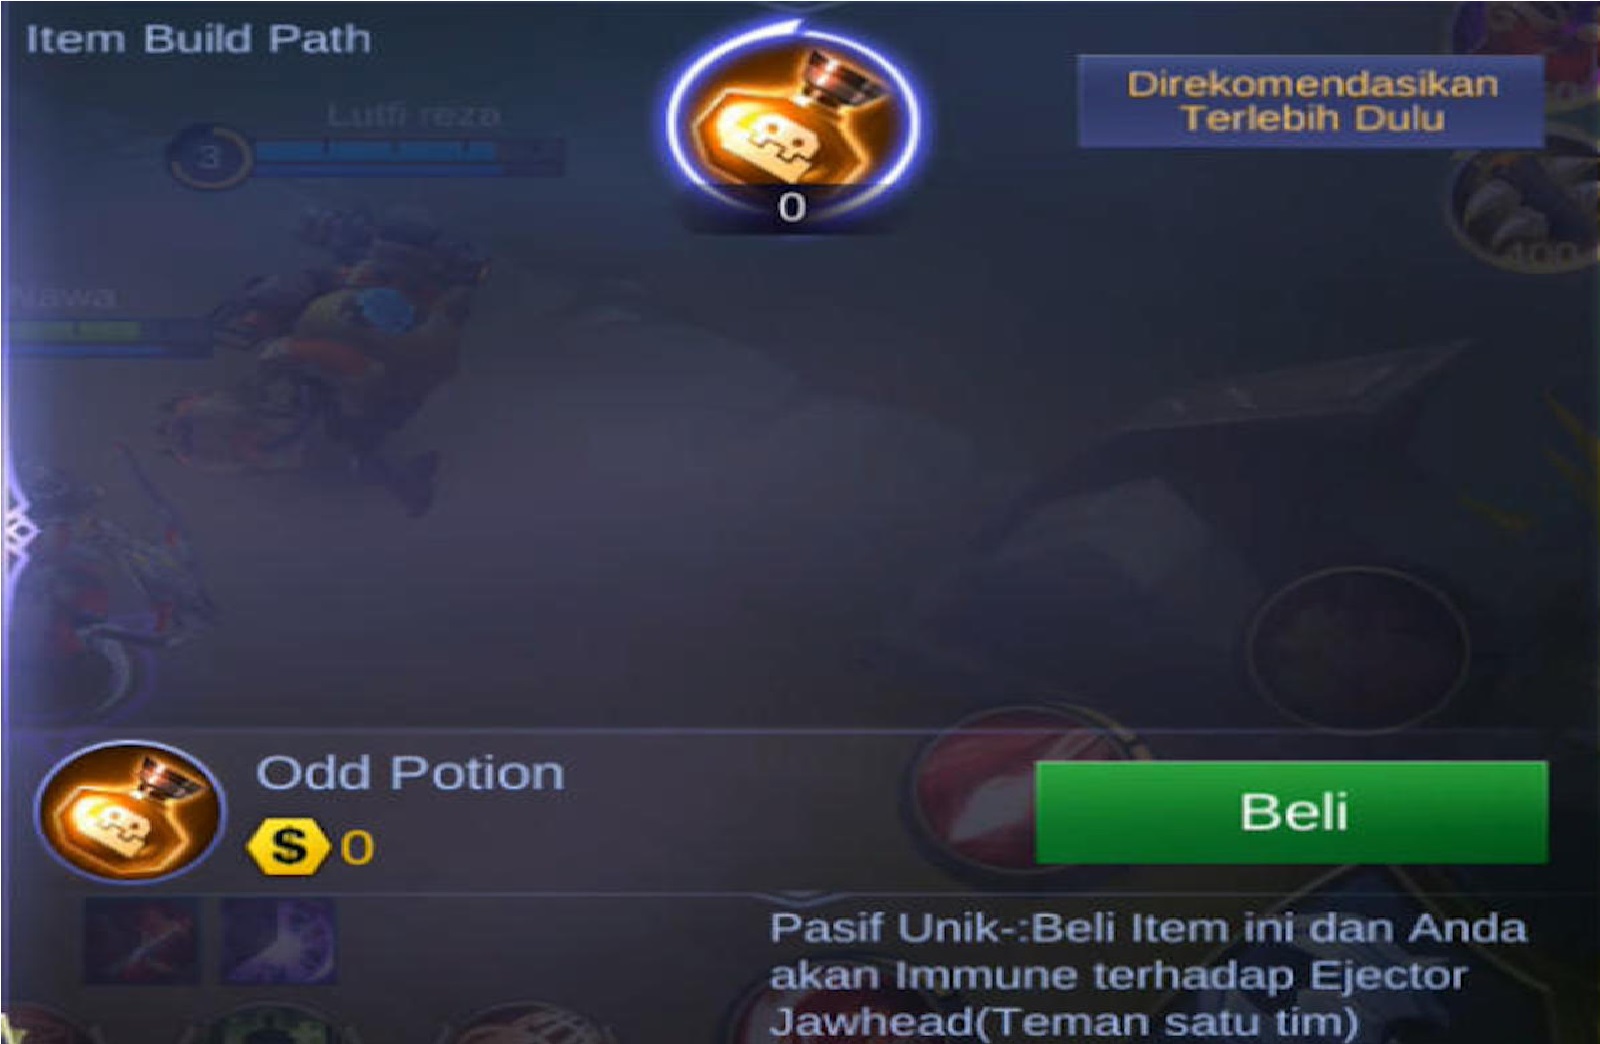 How To Buy And Build Anti Jawhead Mobile Legends Items Ml Esports